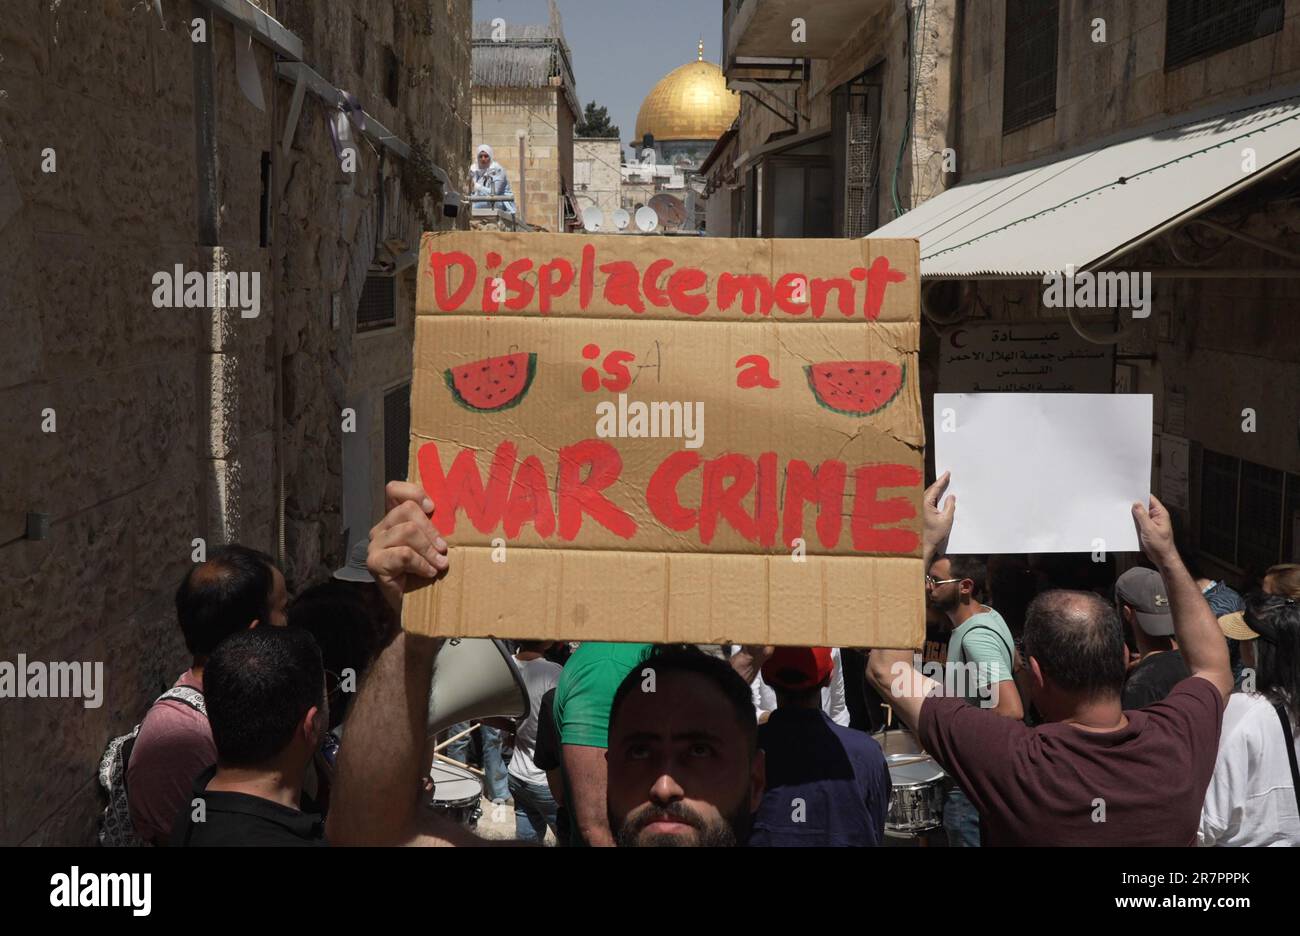 JERUSALEM, ISRAEL - JUNE 16: A protestor holds a sign which reads 'Displacement is a war crime' during a demonstration held by Palestinians and Israeli peace activists against the eviction of Palestinian Sub-Laban family from their home in front of their house in the old city on June 16, 2023 in Jerusalem, Israel. After decades of legal wrangling, the Sub Laban family lost their case in the Israeli courts against Jewish organizations to take over their home in the Muslim Quarter of Jerusalem. Credit: Eddie Gerald/Alamy Live News Stock Photo